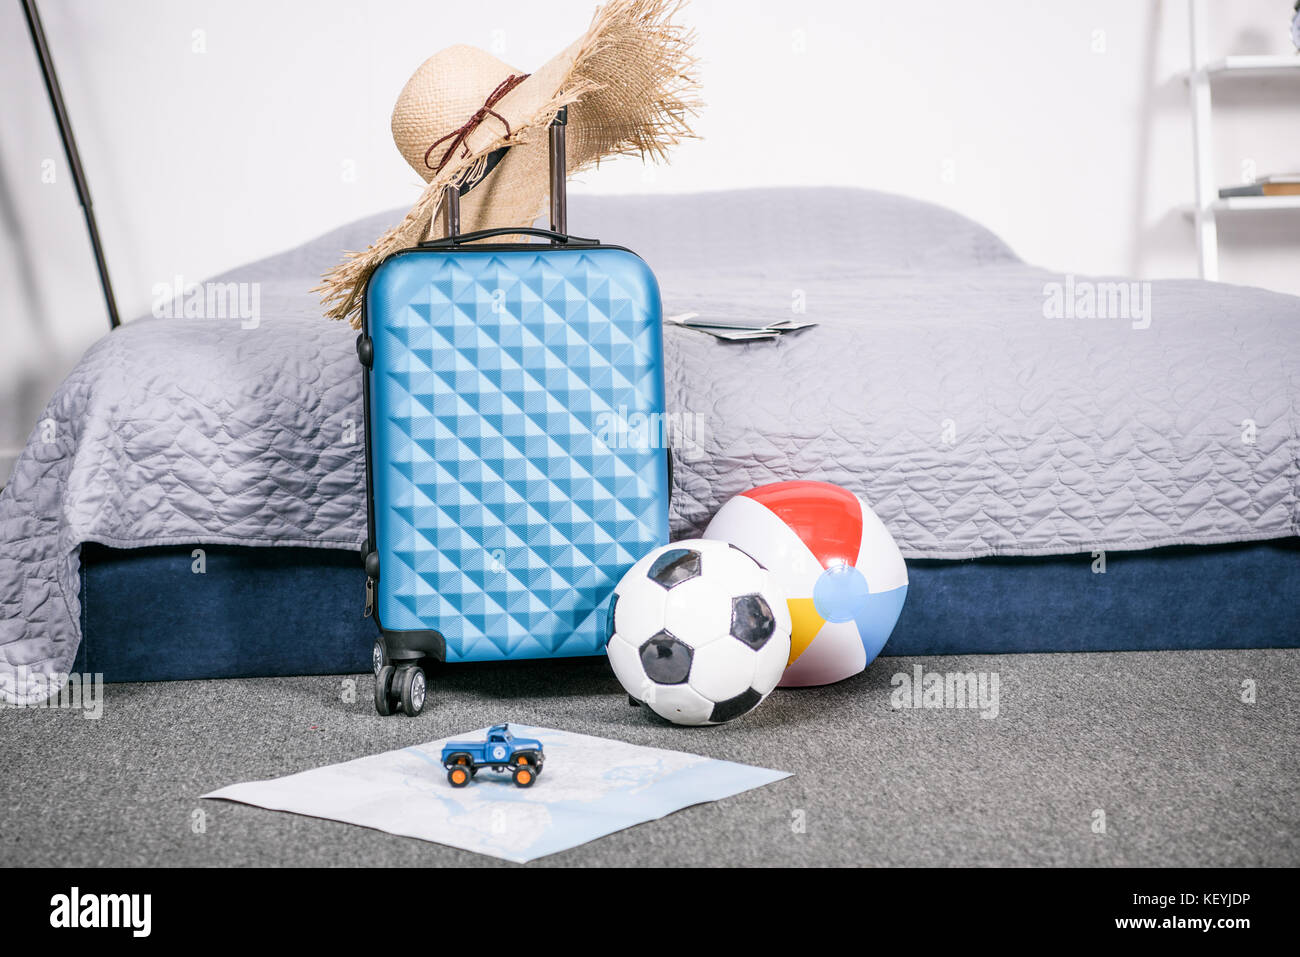 suitcase with straw hat Stock Photo